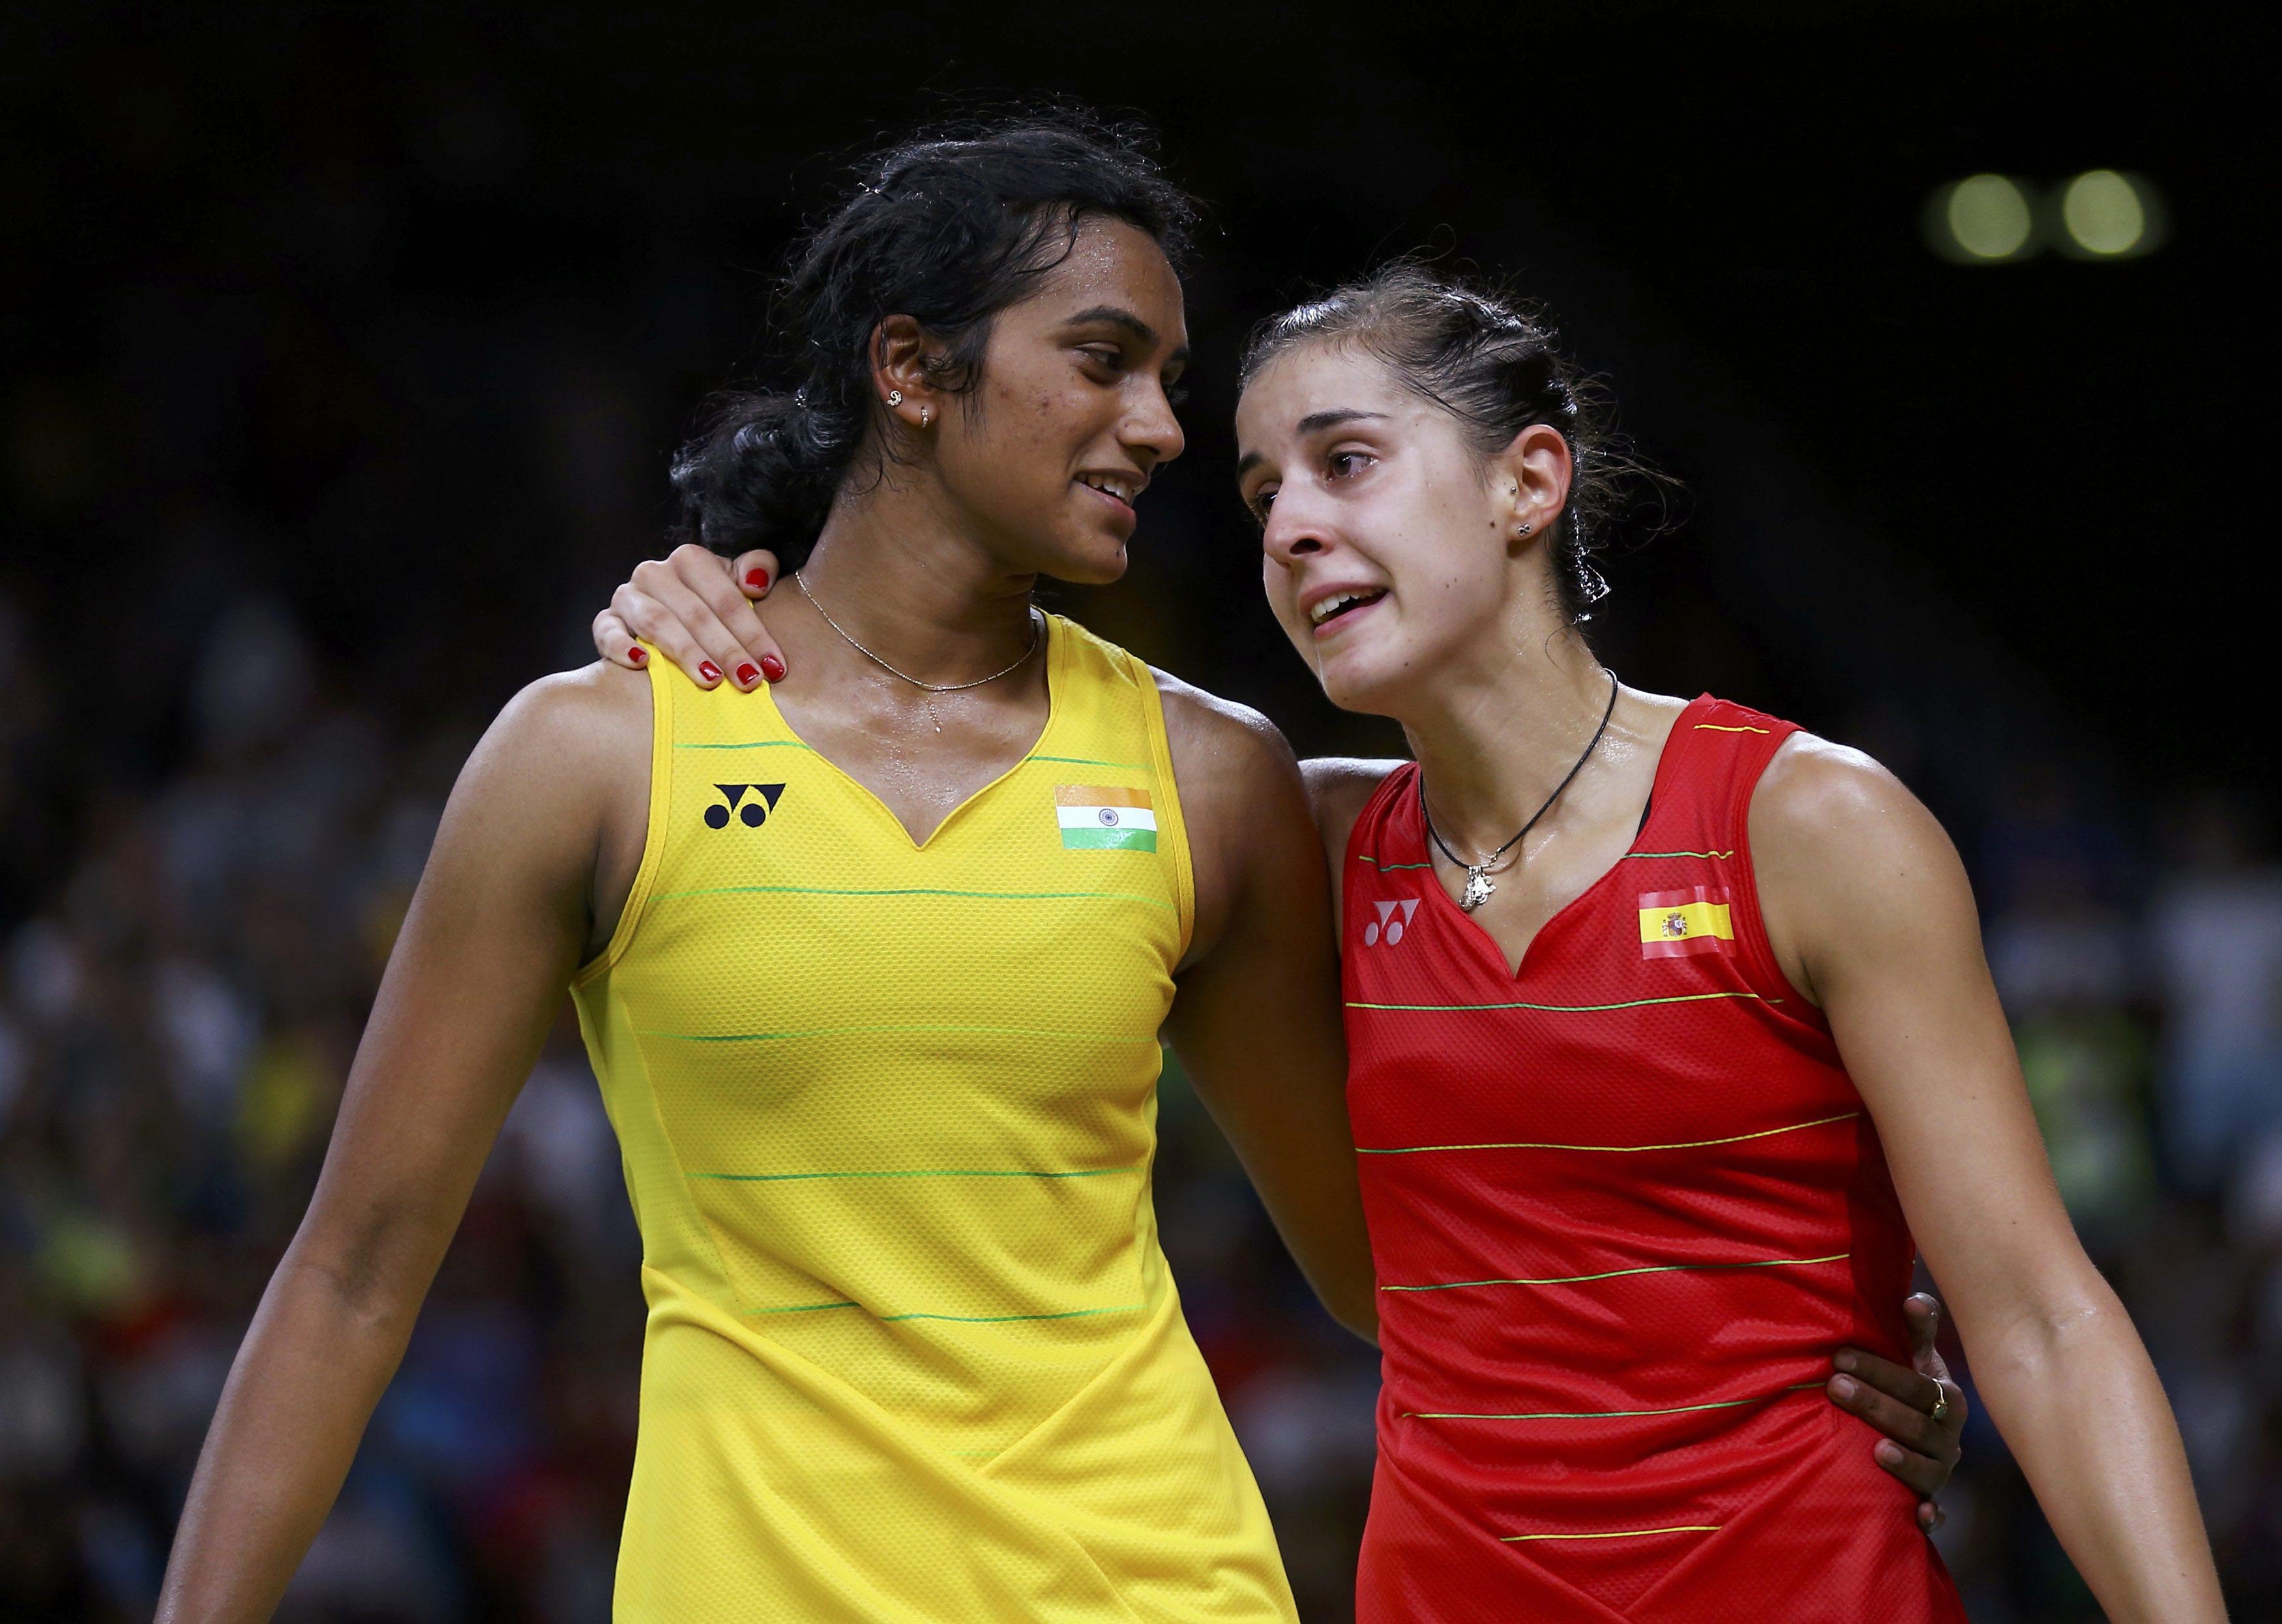 PV Sindhu v/s Carolina Marin BWF World Super Series Final Live streaming and where to watch in India